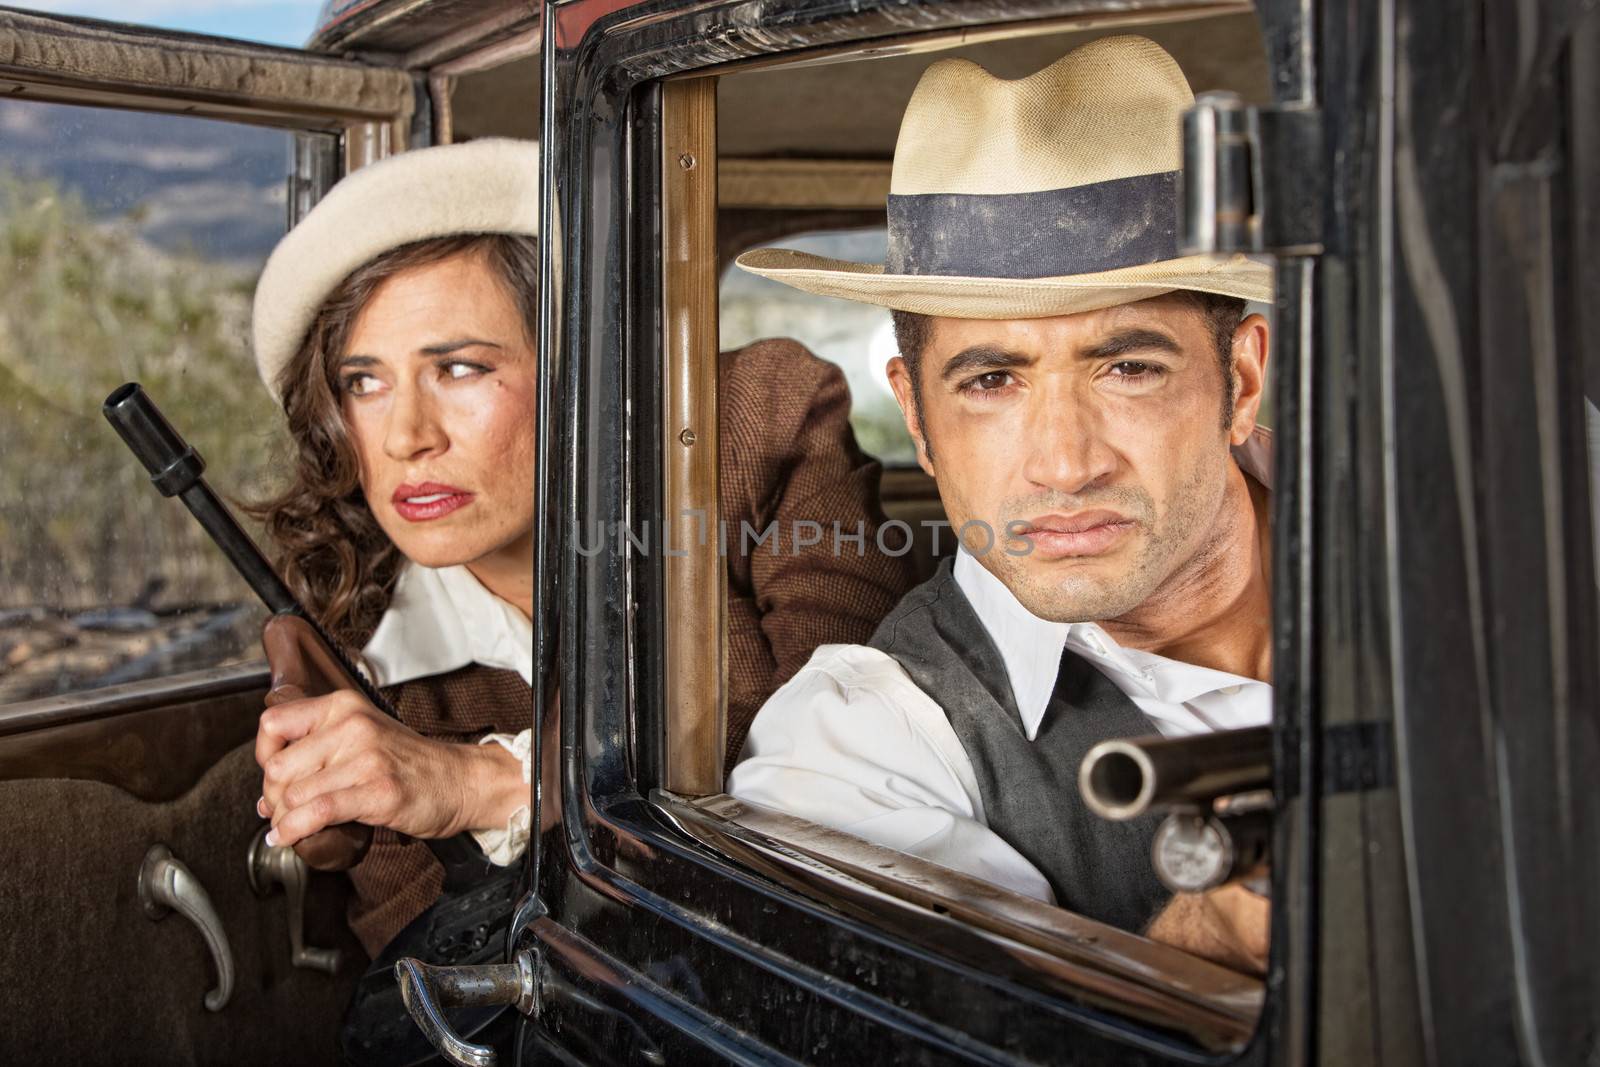 Gangster couple on lookout in their antique automobile